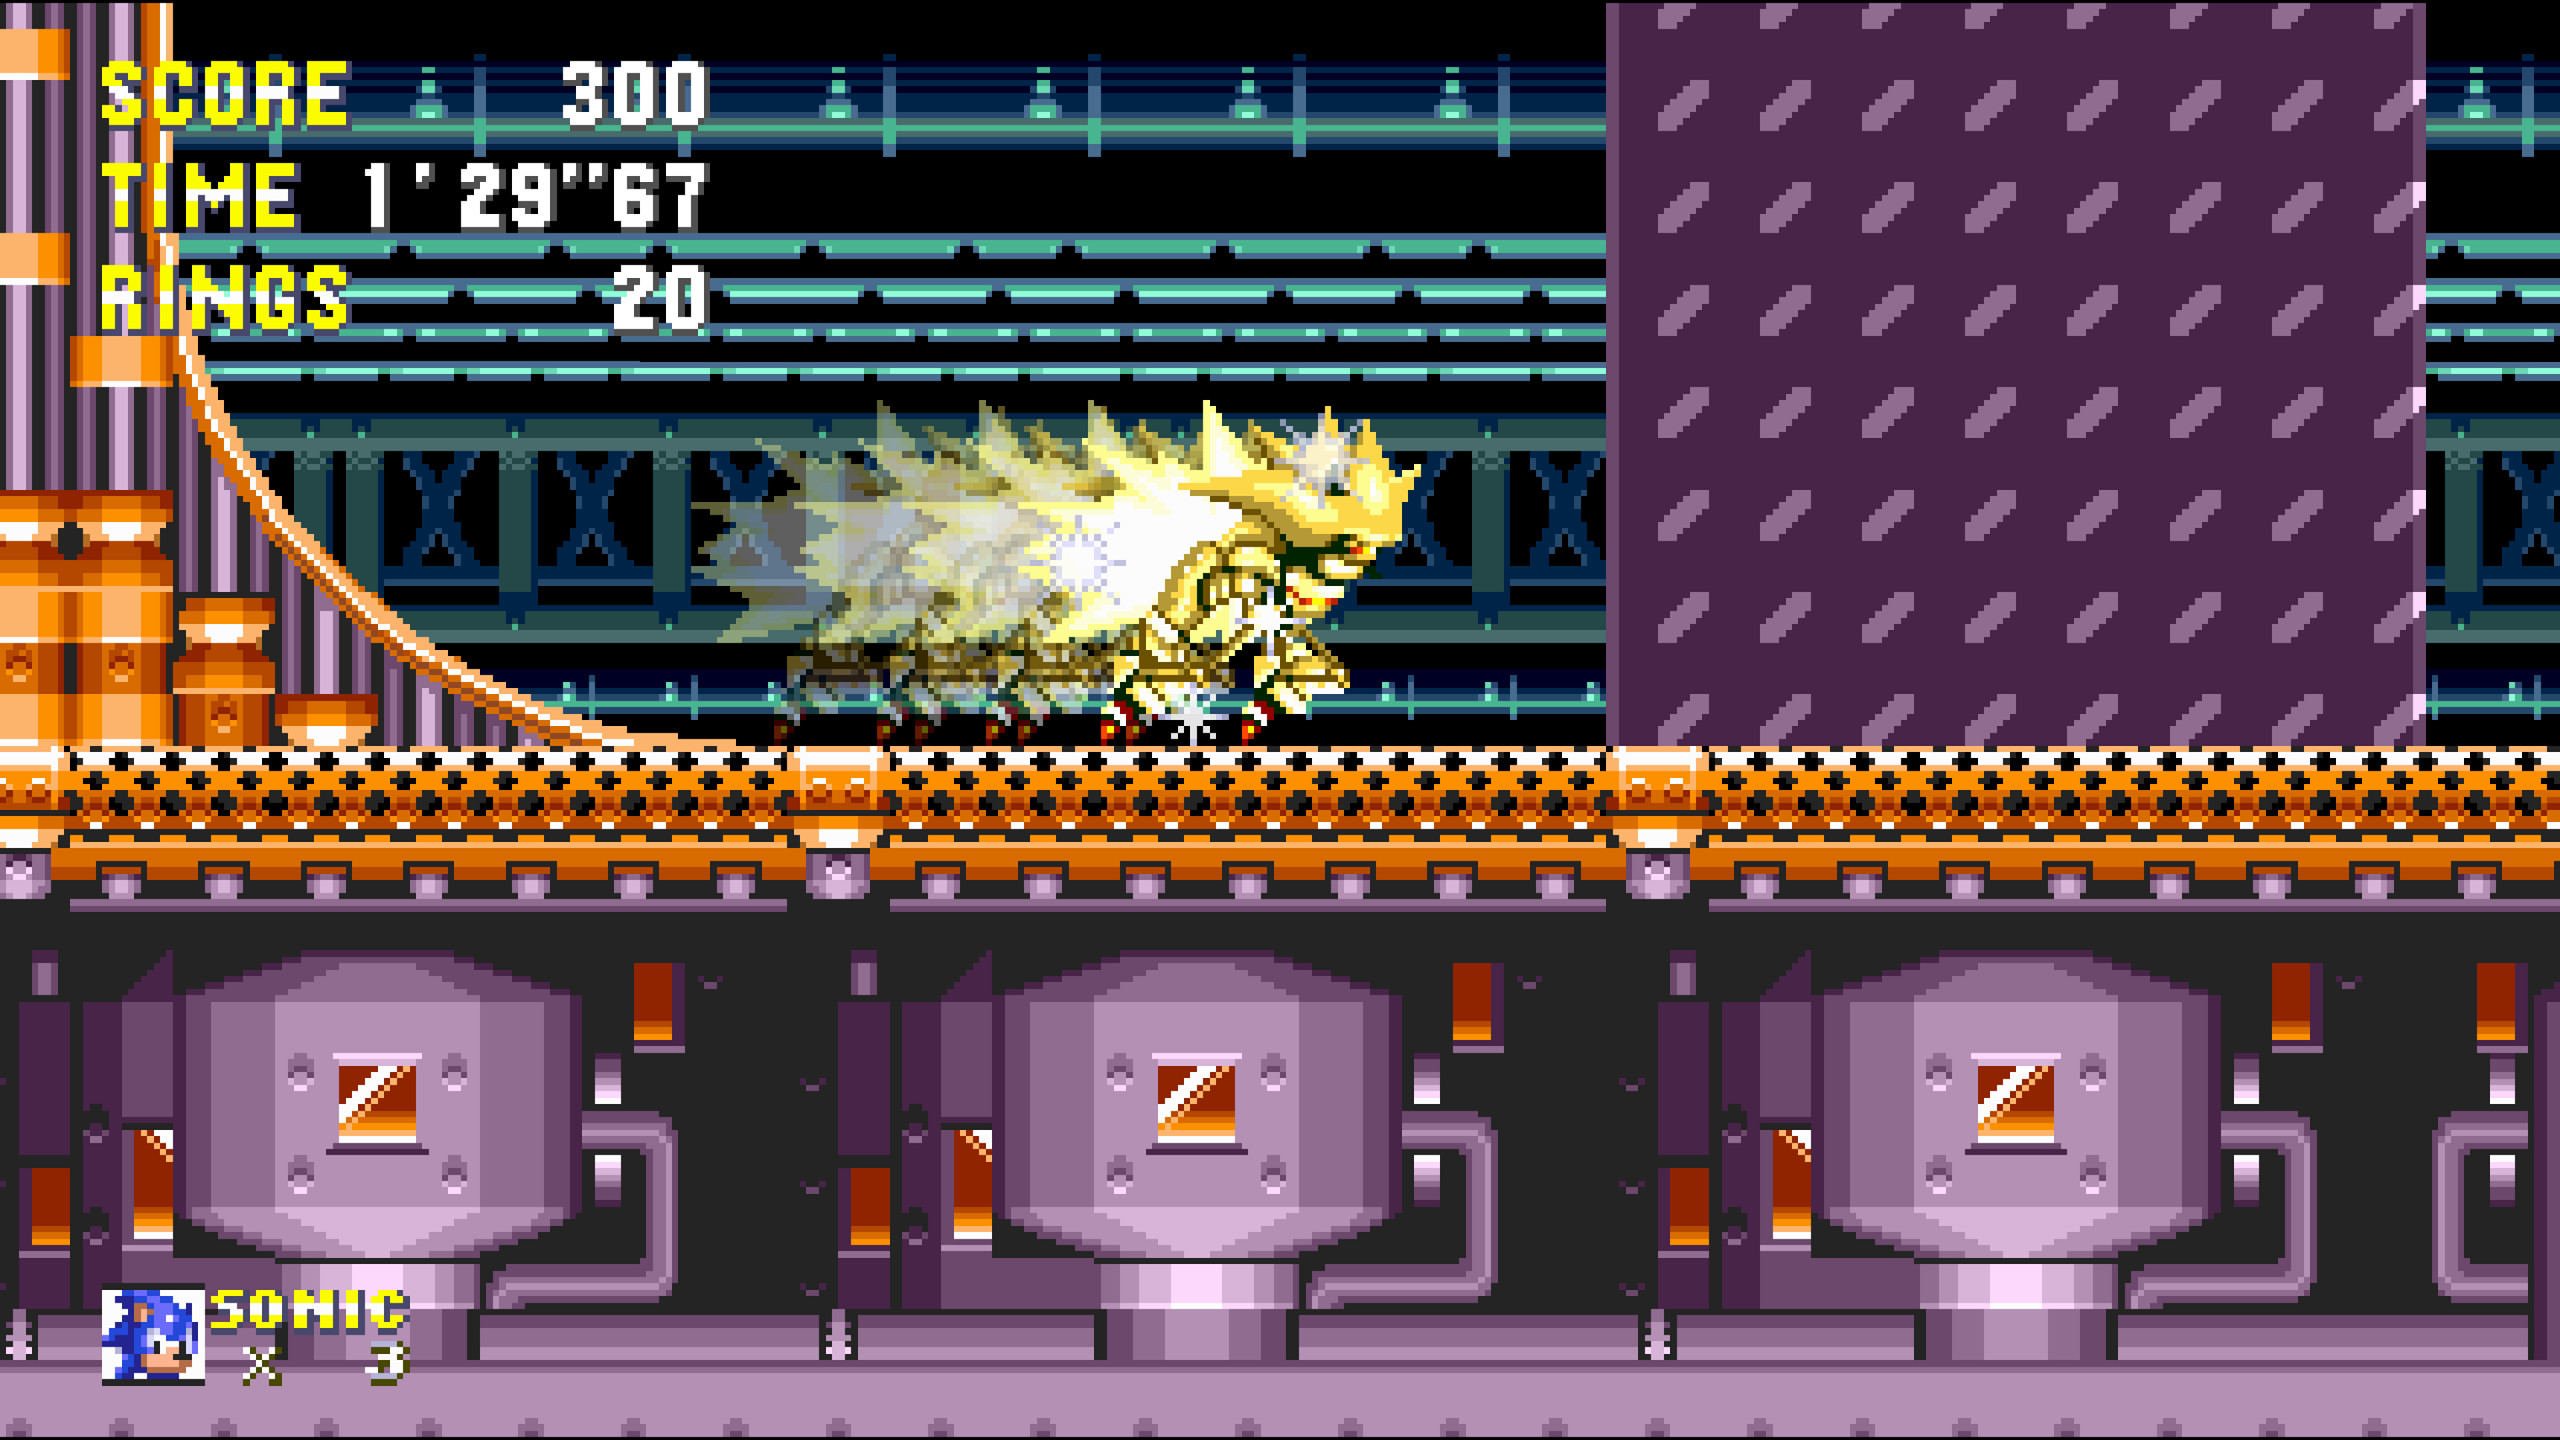 You can fight Metal Sonic and Sonic in Sonic 3 air [Sonic 3 A.I.R.